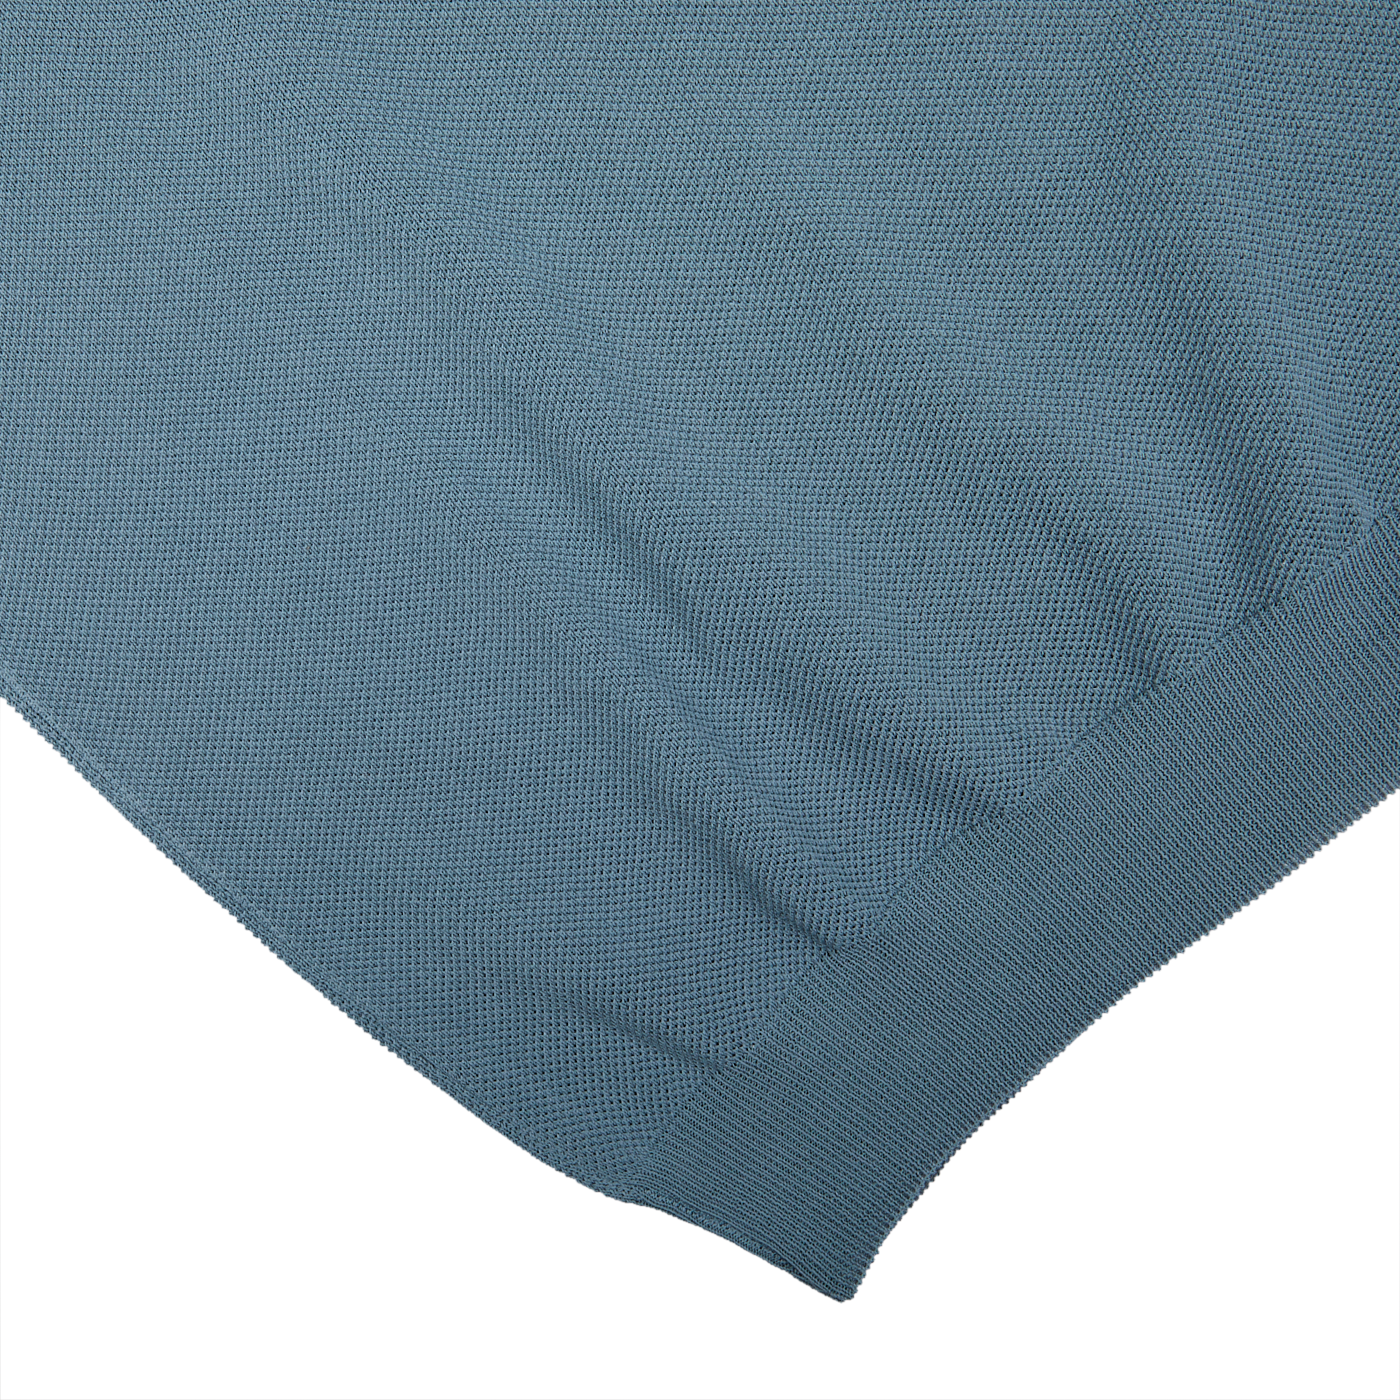 Close-up view of a Turquoise Fresh Cotton Mesh Polo Shirt by Gran Sasso against a white background.